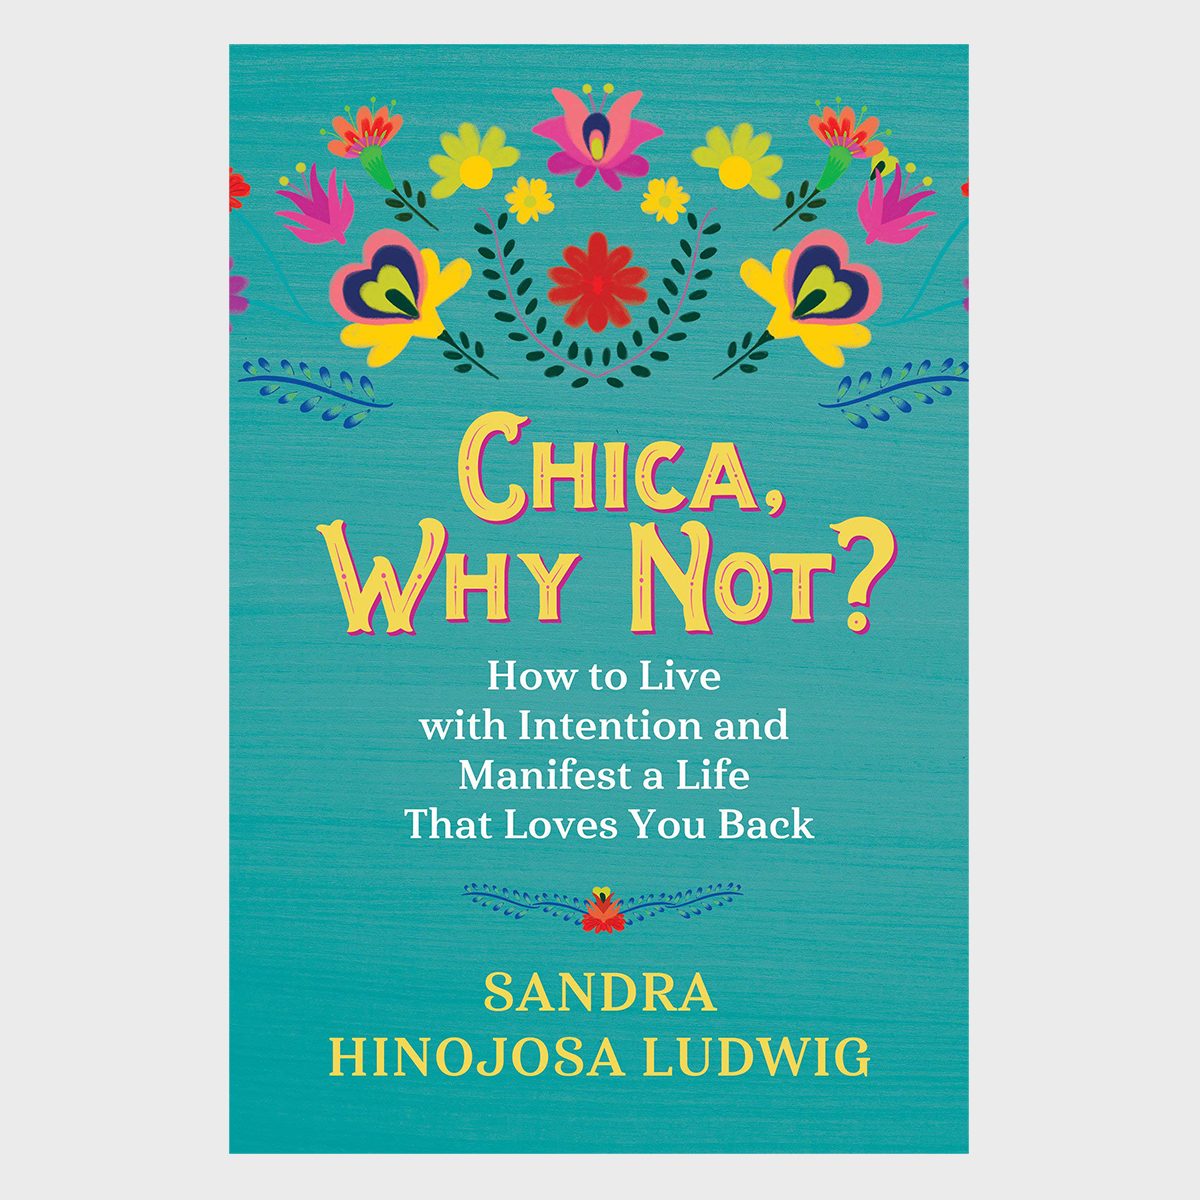 Chica Why Not How To Live With Intention And Manifest A Life That Loves You Back By Sandra Hinojosa Ludwig